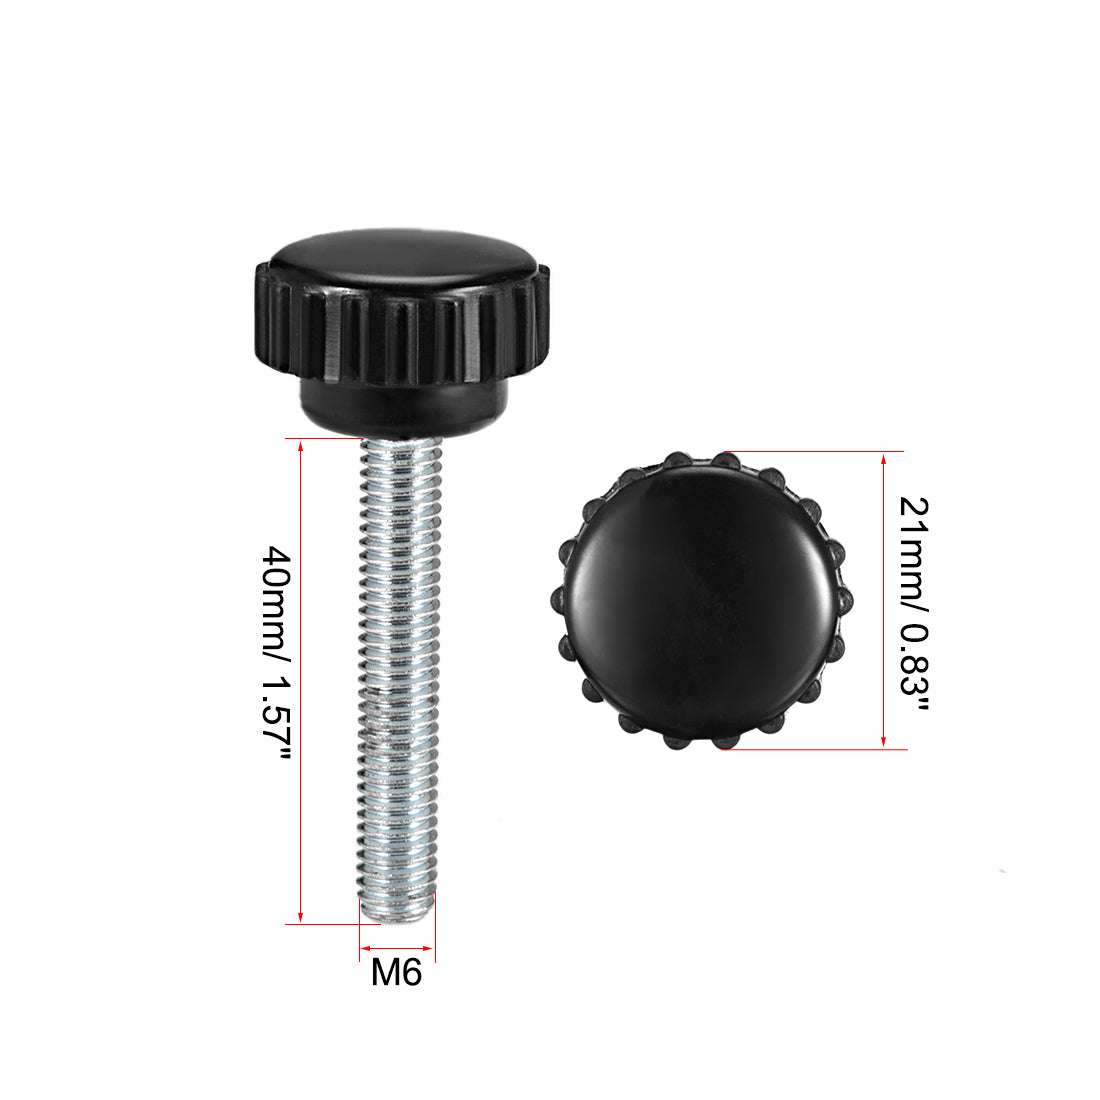 Uxcell Uxcell M5 x 30mm Male Thread Knurled Clamping Knobs Grip Thumb Screw on Type  3 Pcs